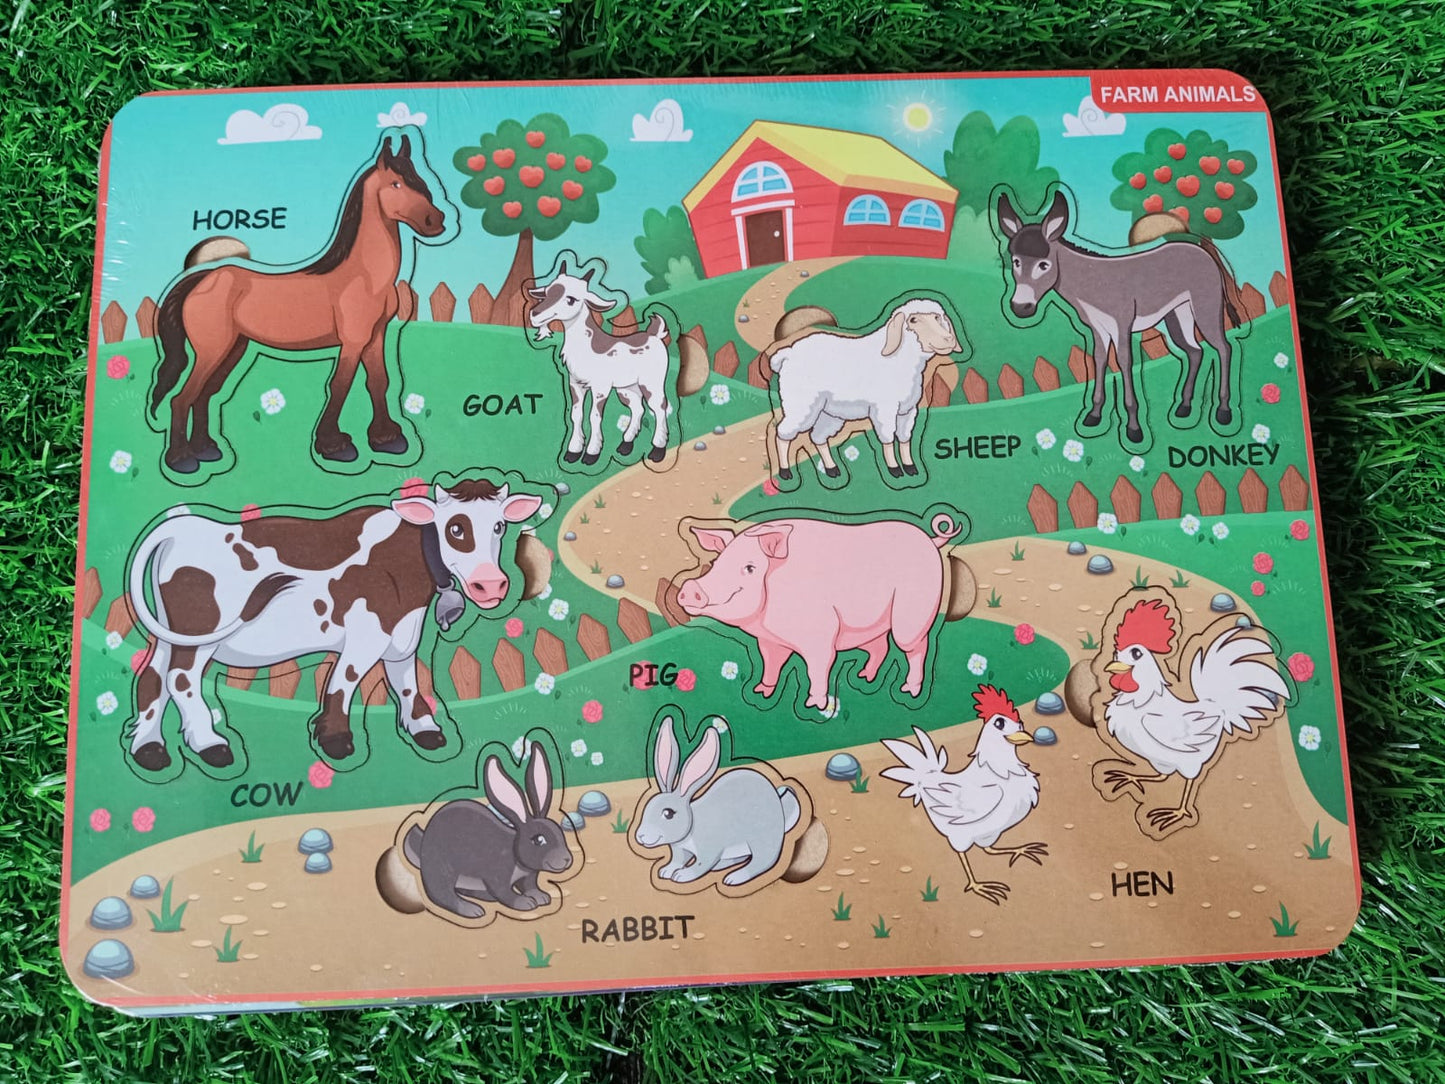 My First Learning Set Board Puzzles for Kids-SHTM1070